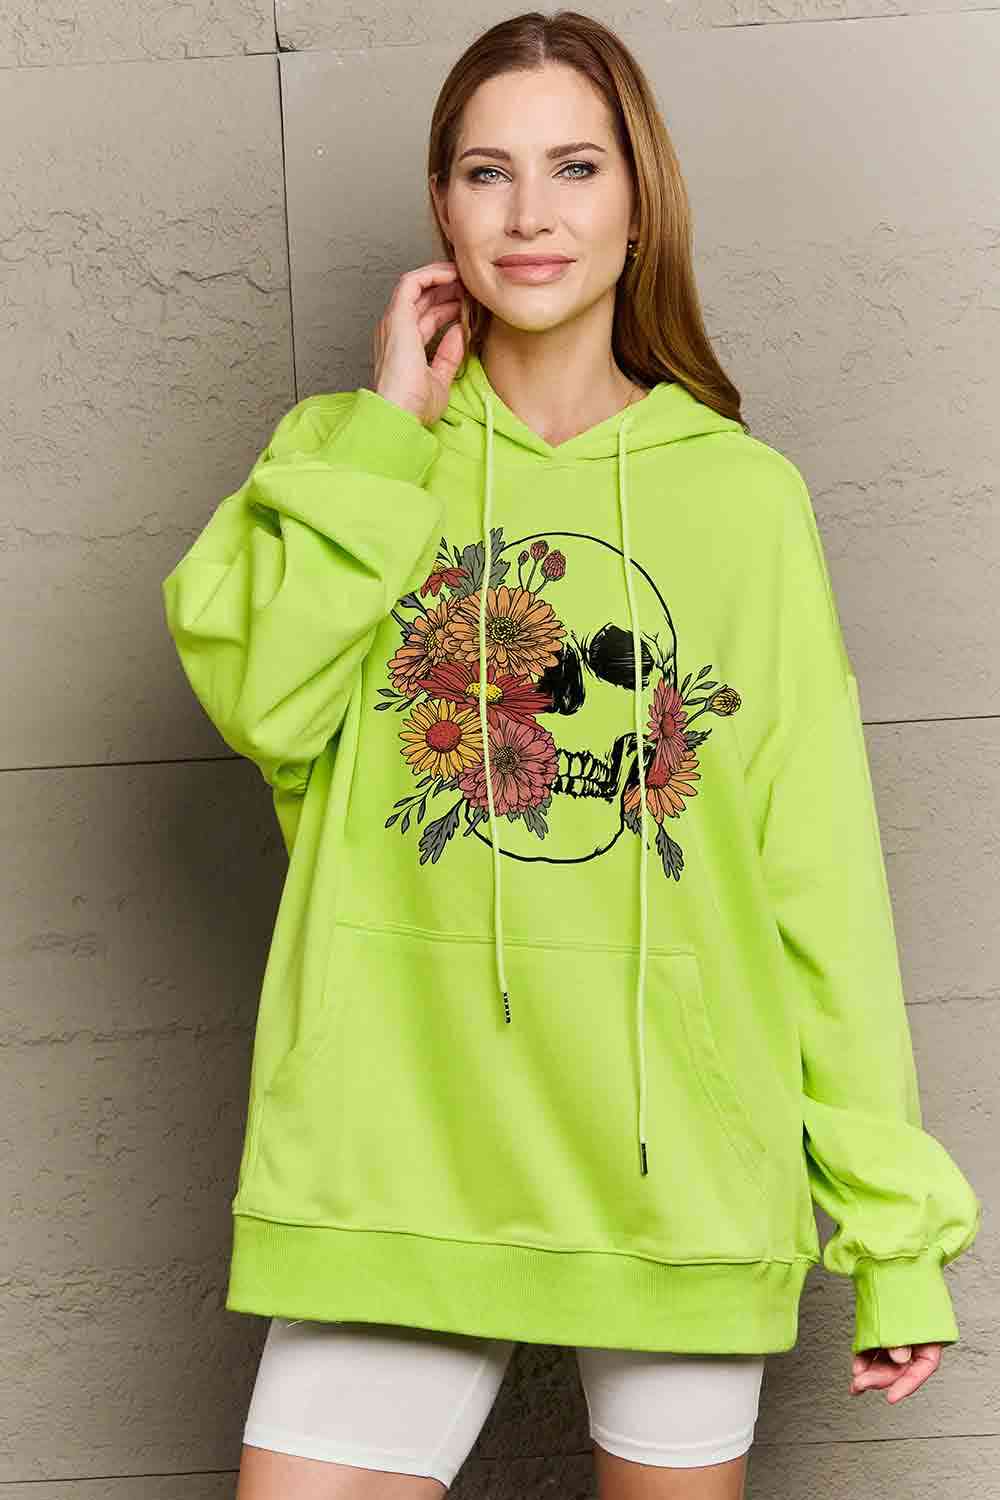 Simply Love Simply Love Full Size Floral Skull Graphic Hoodie